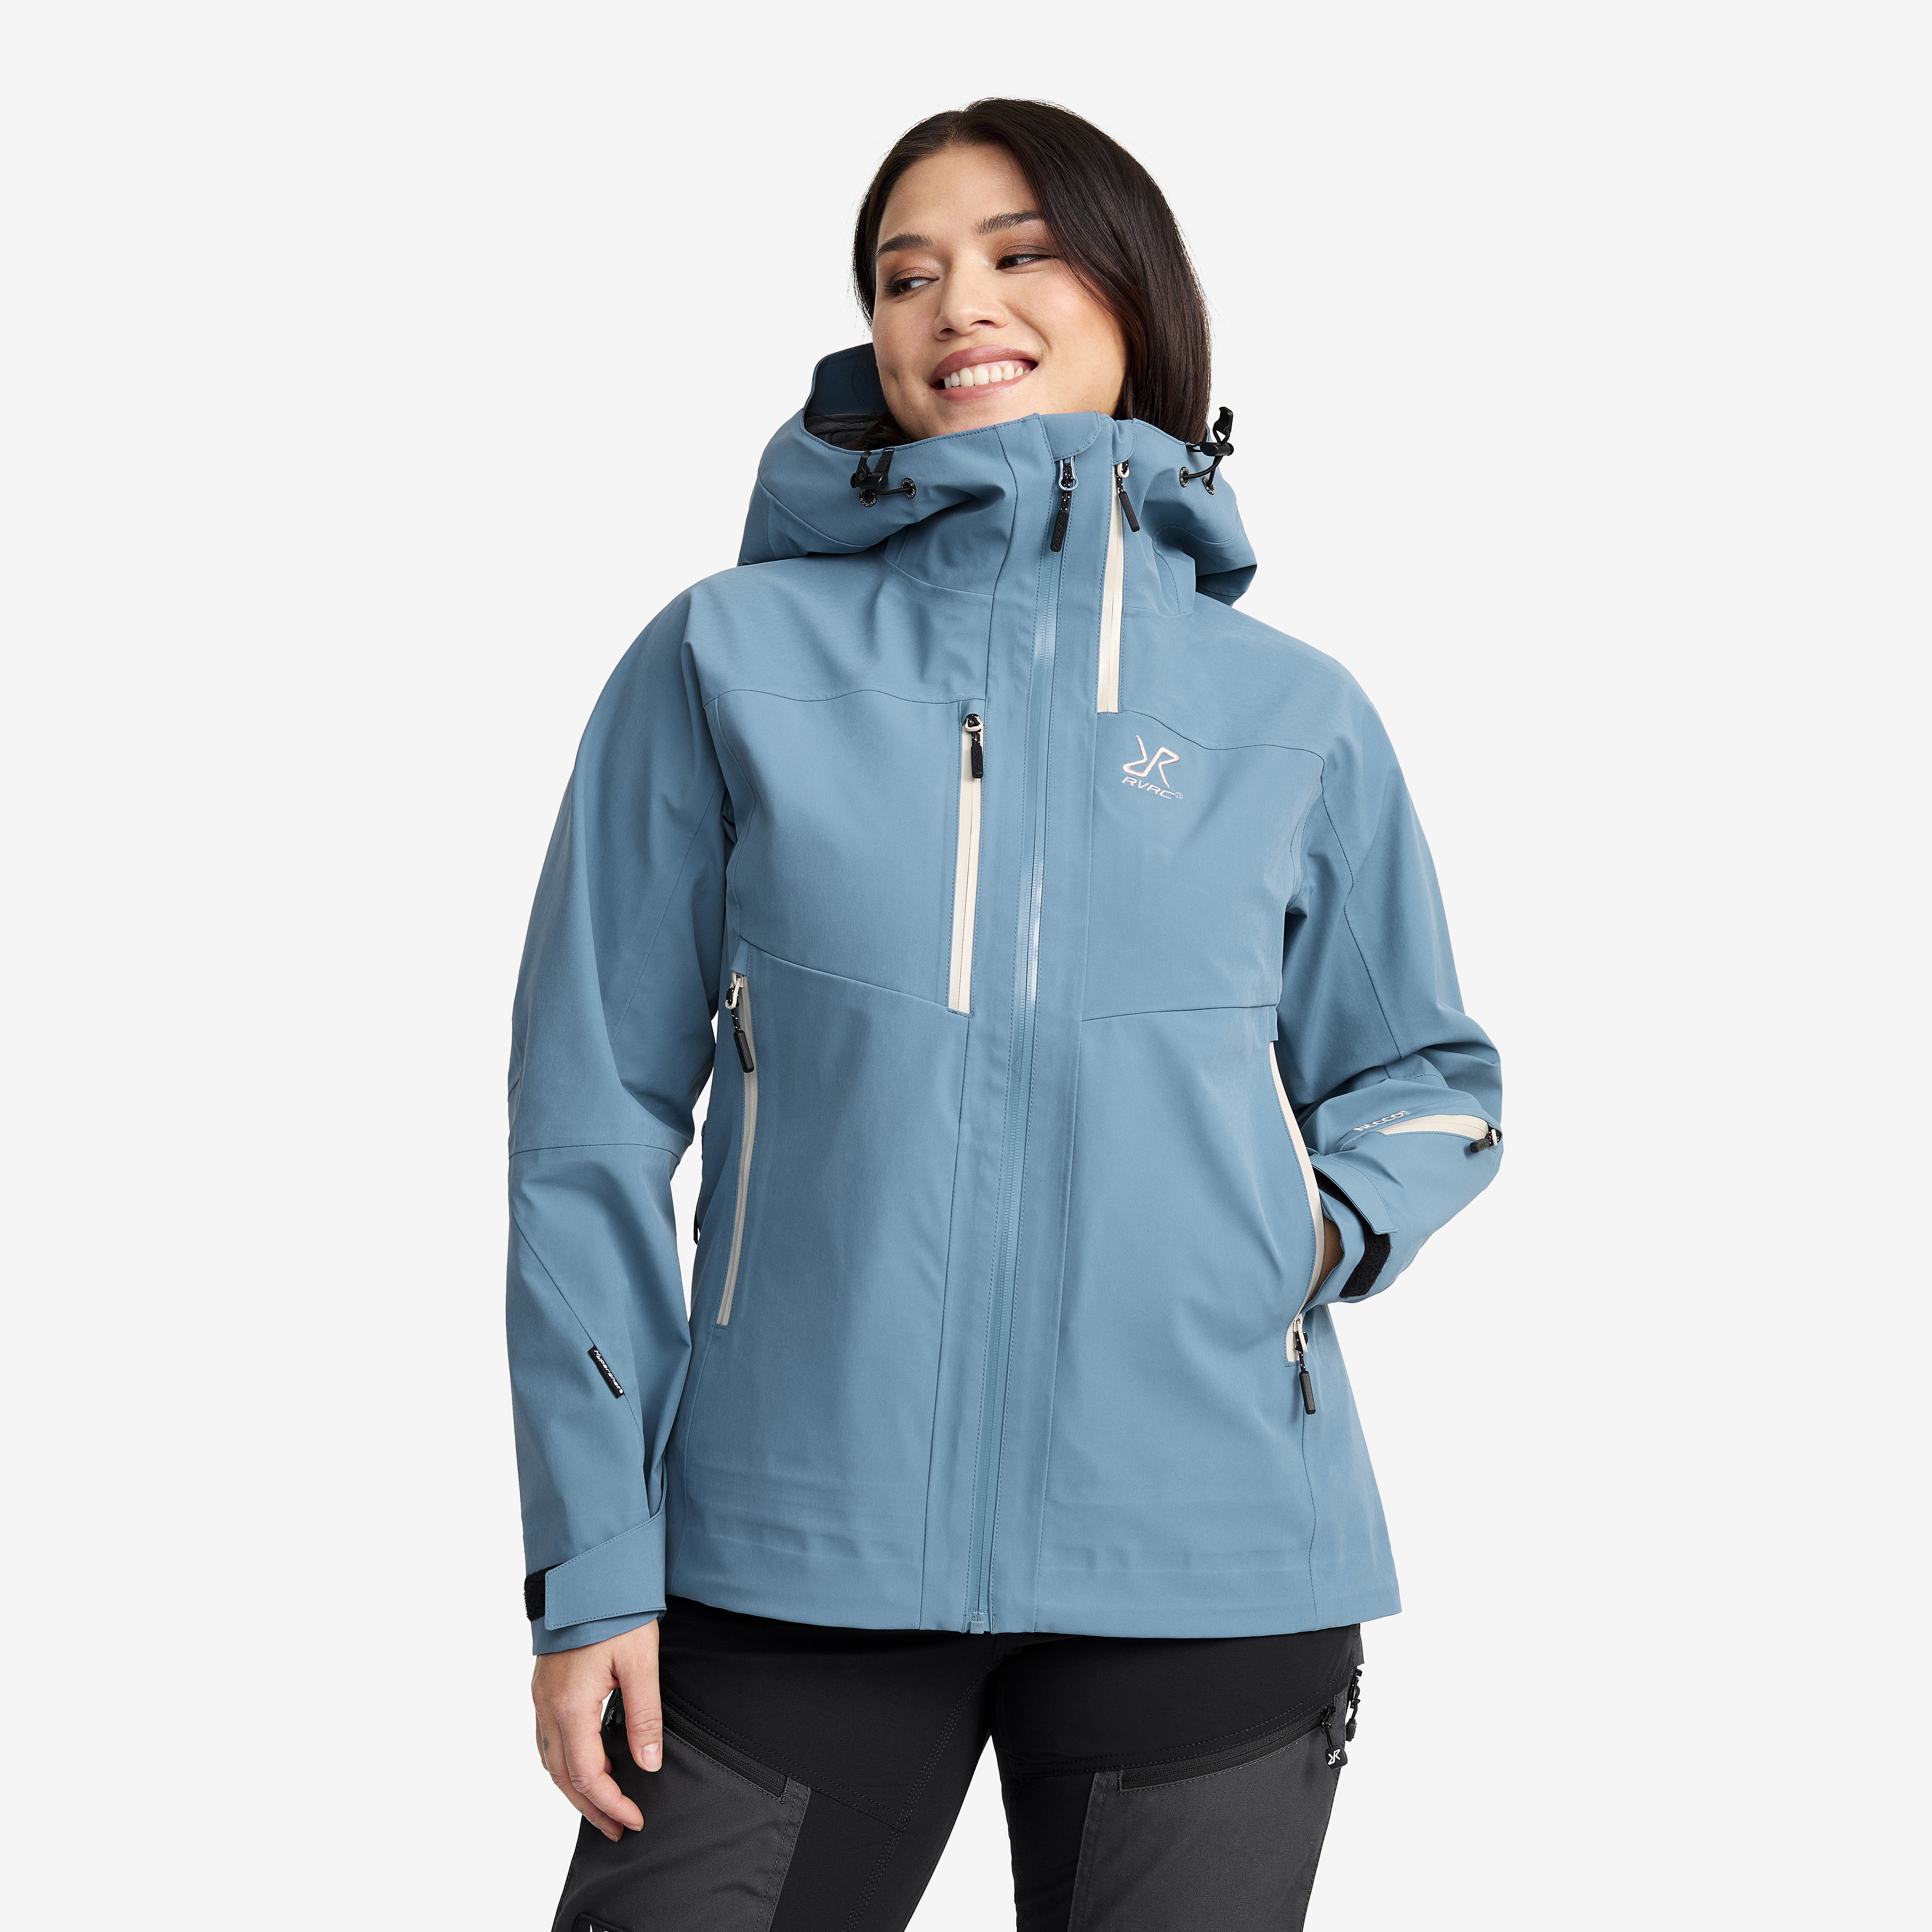 Cyclone 3L Shell Jacket Captain's Blue Femme